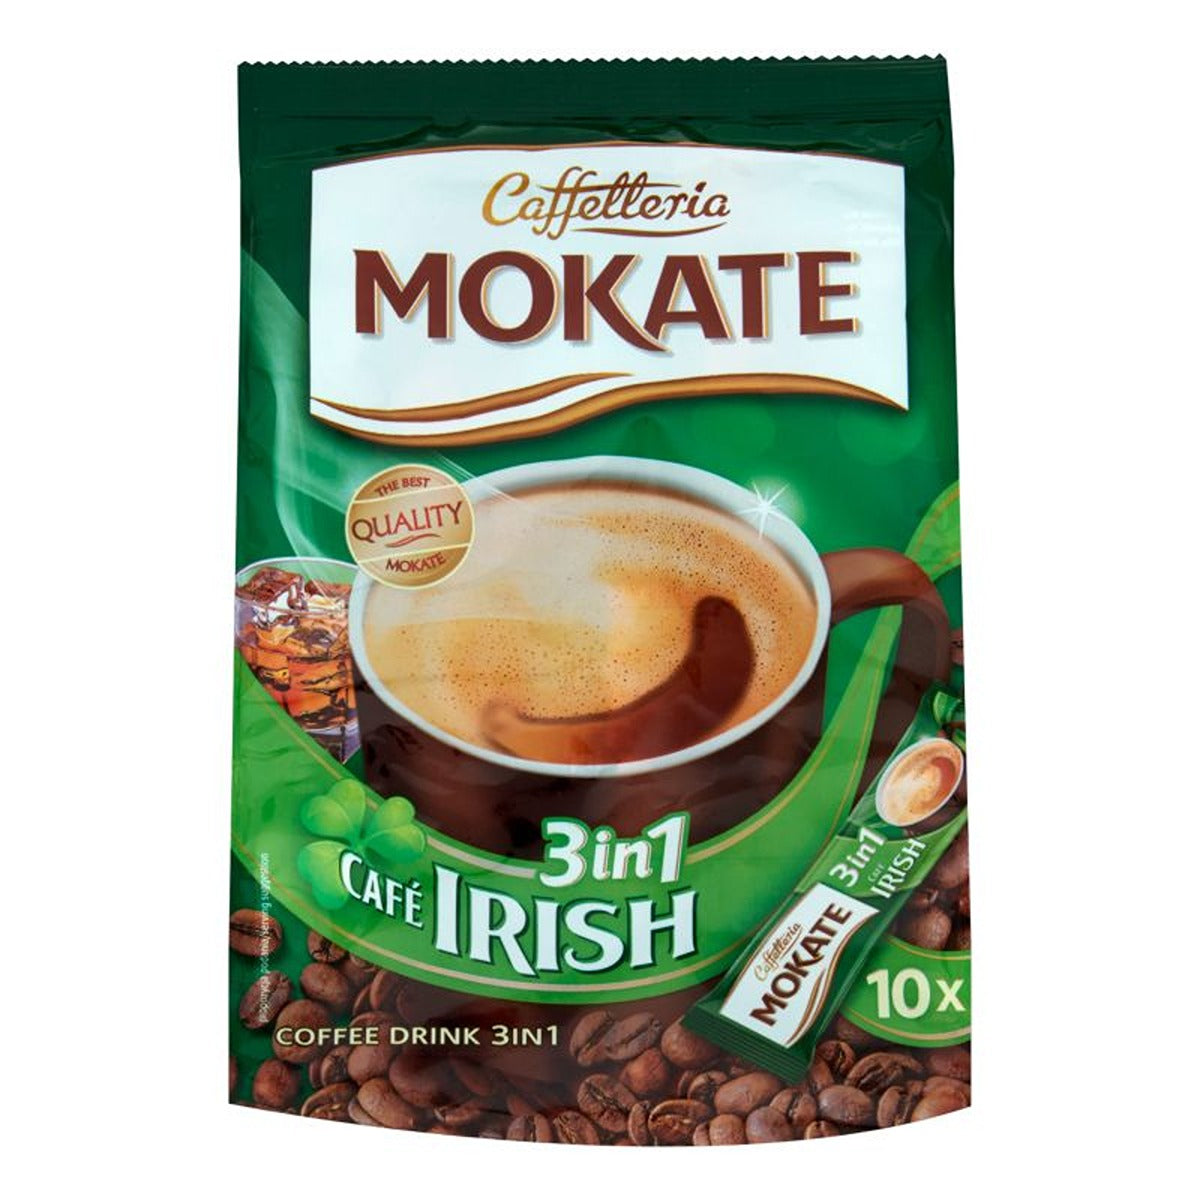 Mokate 3 in 1 Irish Cream Instant Coffee - 10 Pack is the perfect choice for an irish coffee.